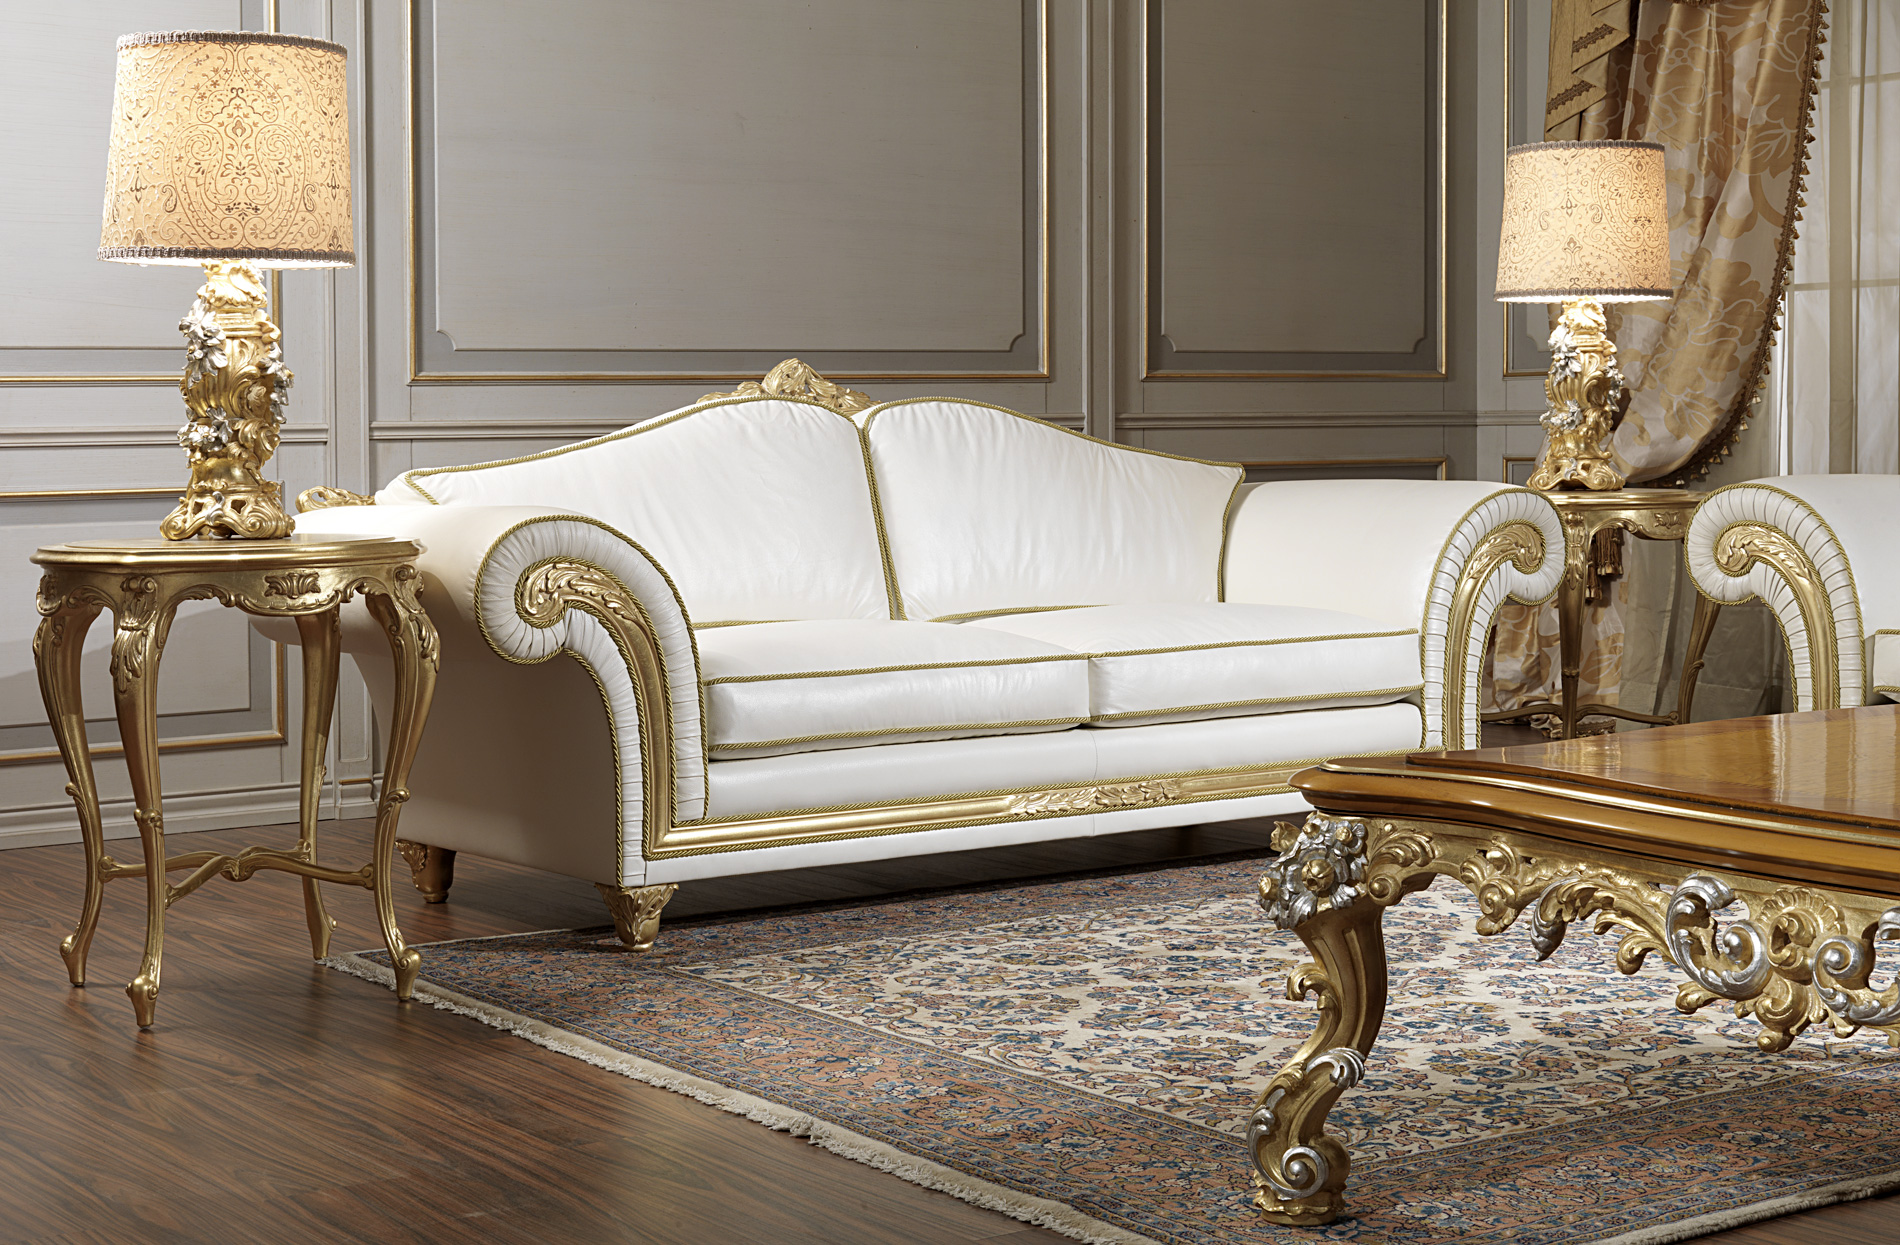 Luxury sofas in leather and gold